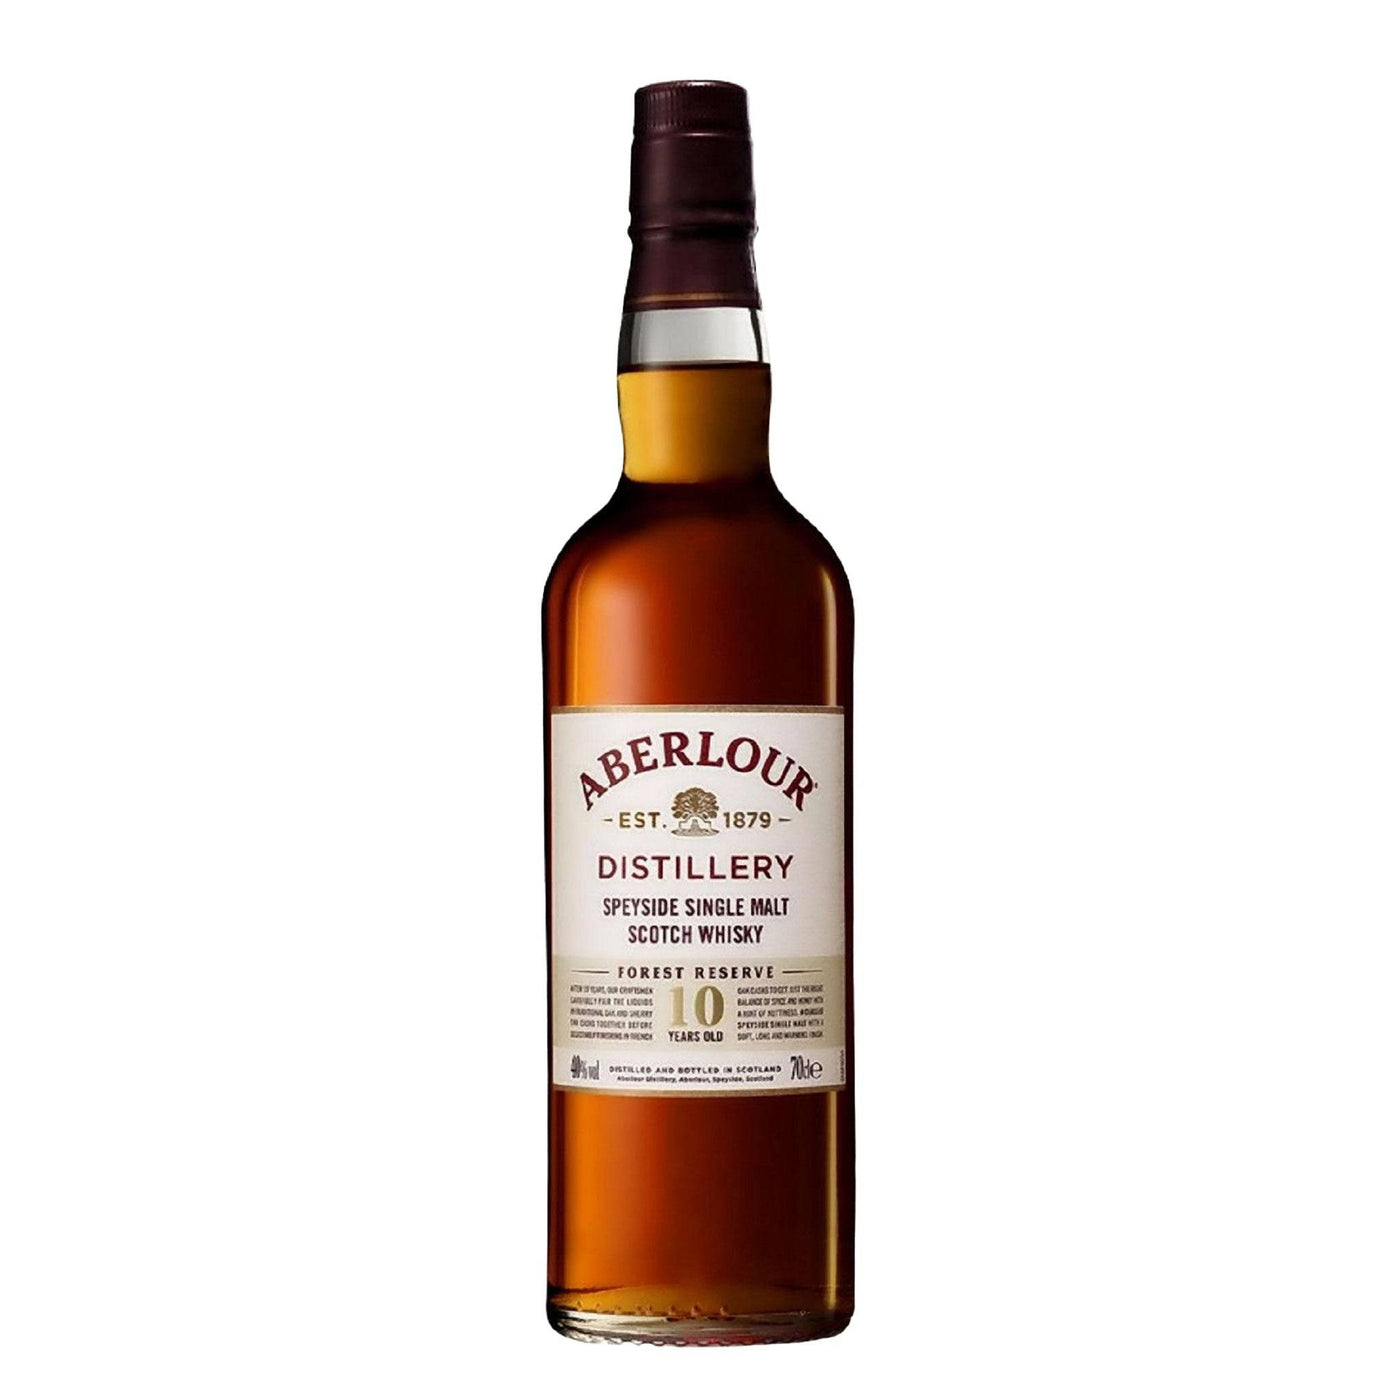 Aberlour 10 Years Forest Reserve Whisky - Spiritly